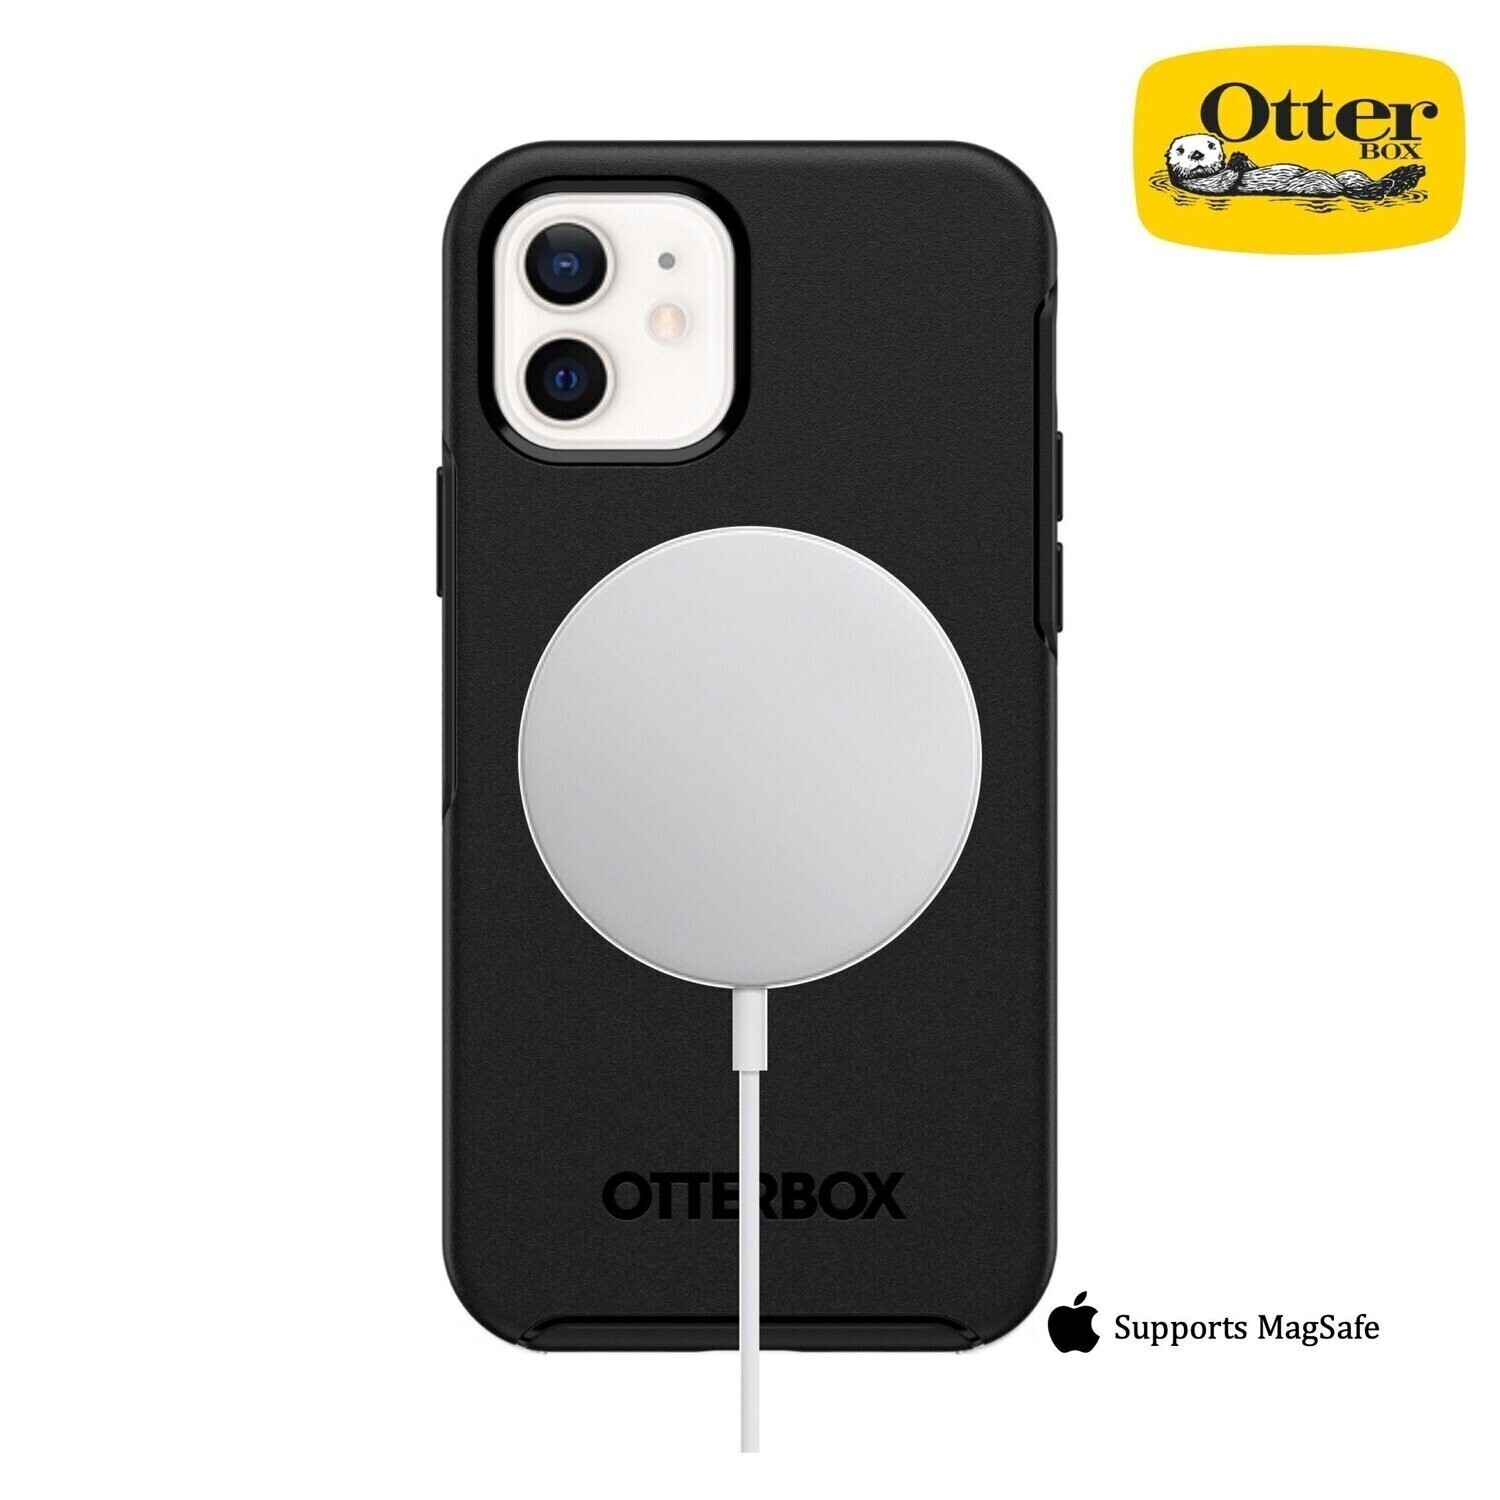 OtterBox iPhone 12 mini Symmetry Series+ Case with MagSafe, Black